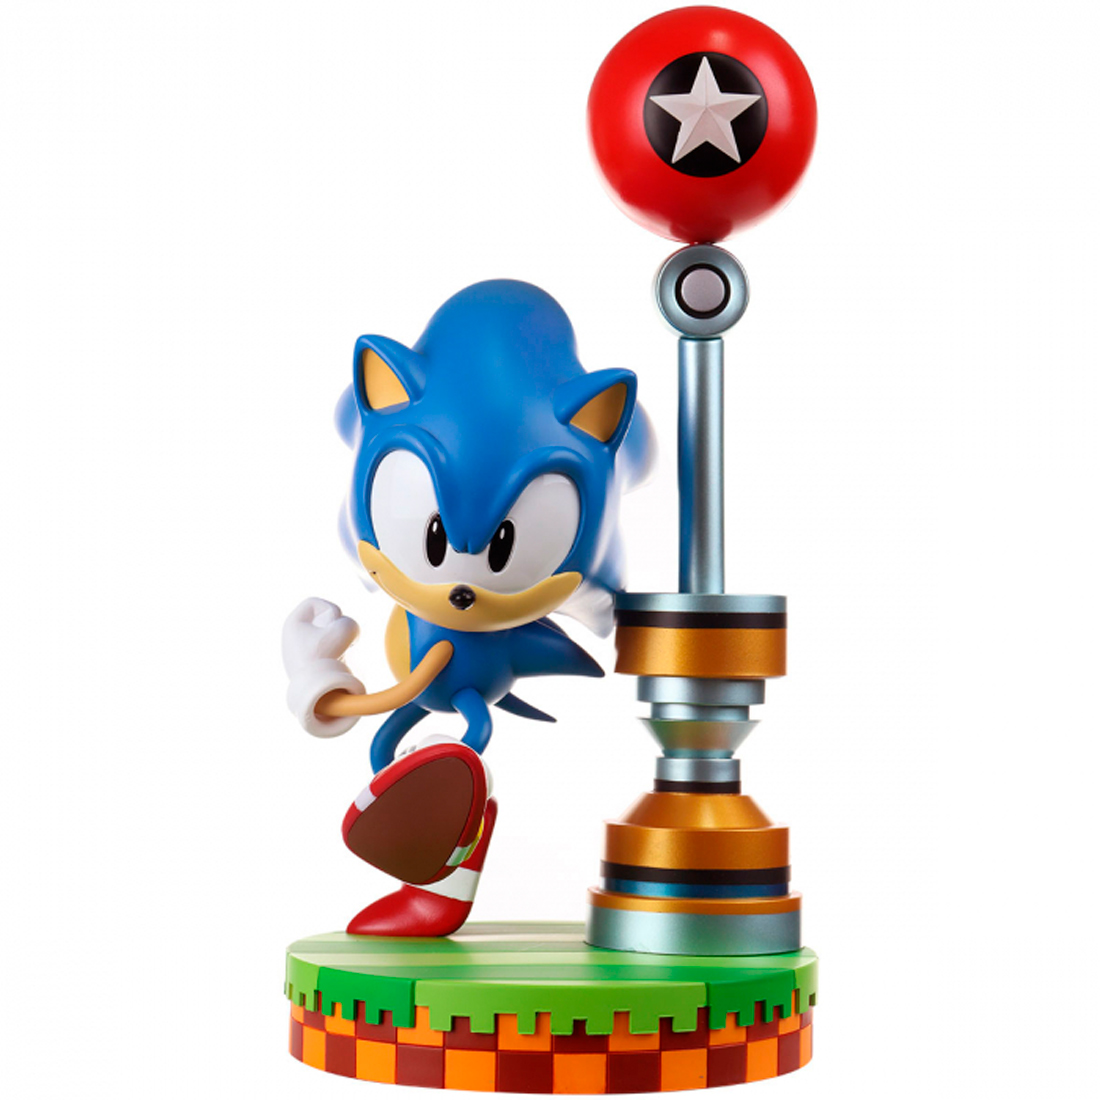 Sonic Standard Edition First 4 Figures